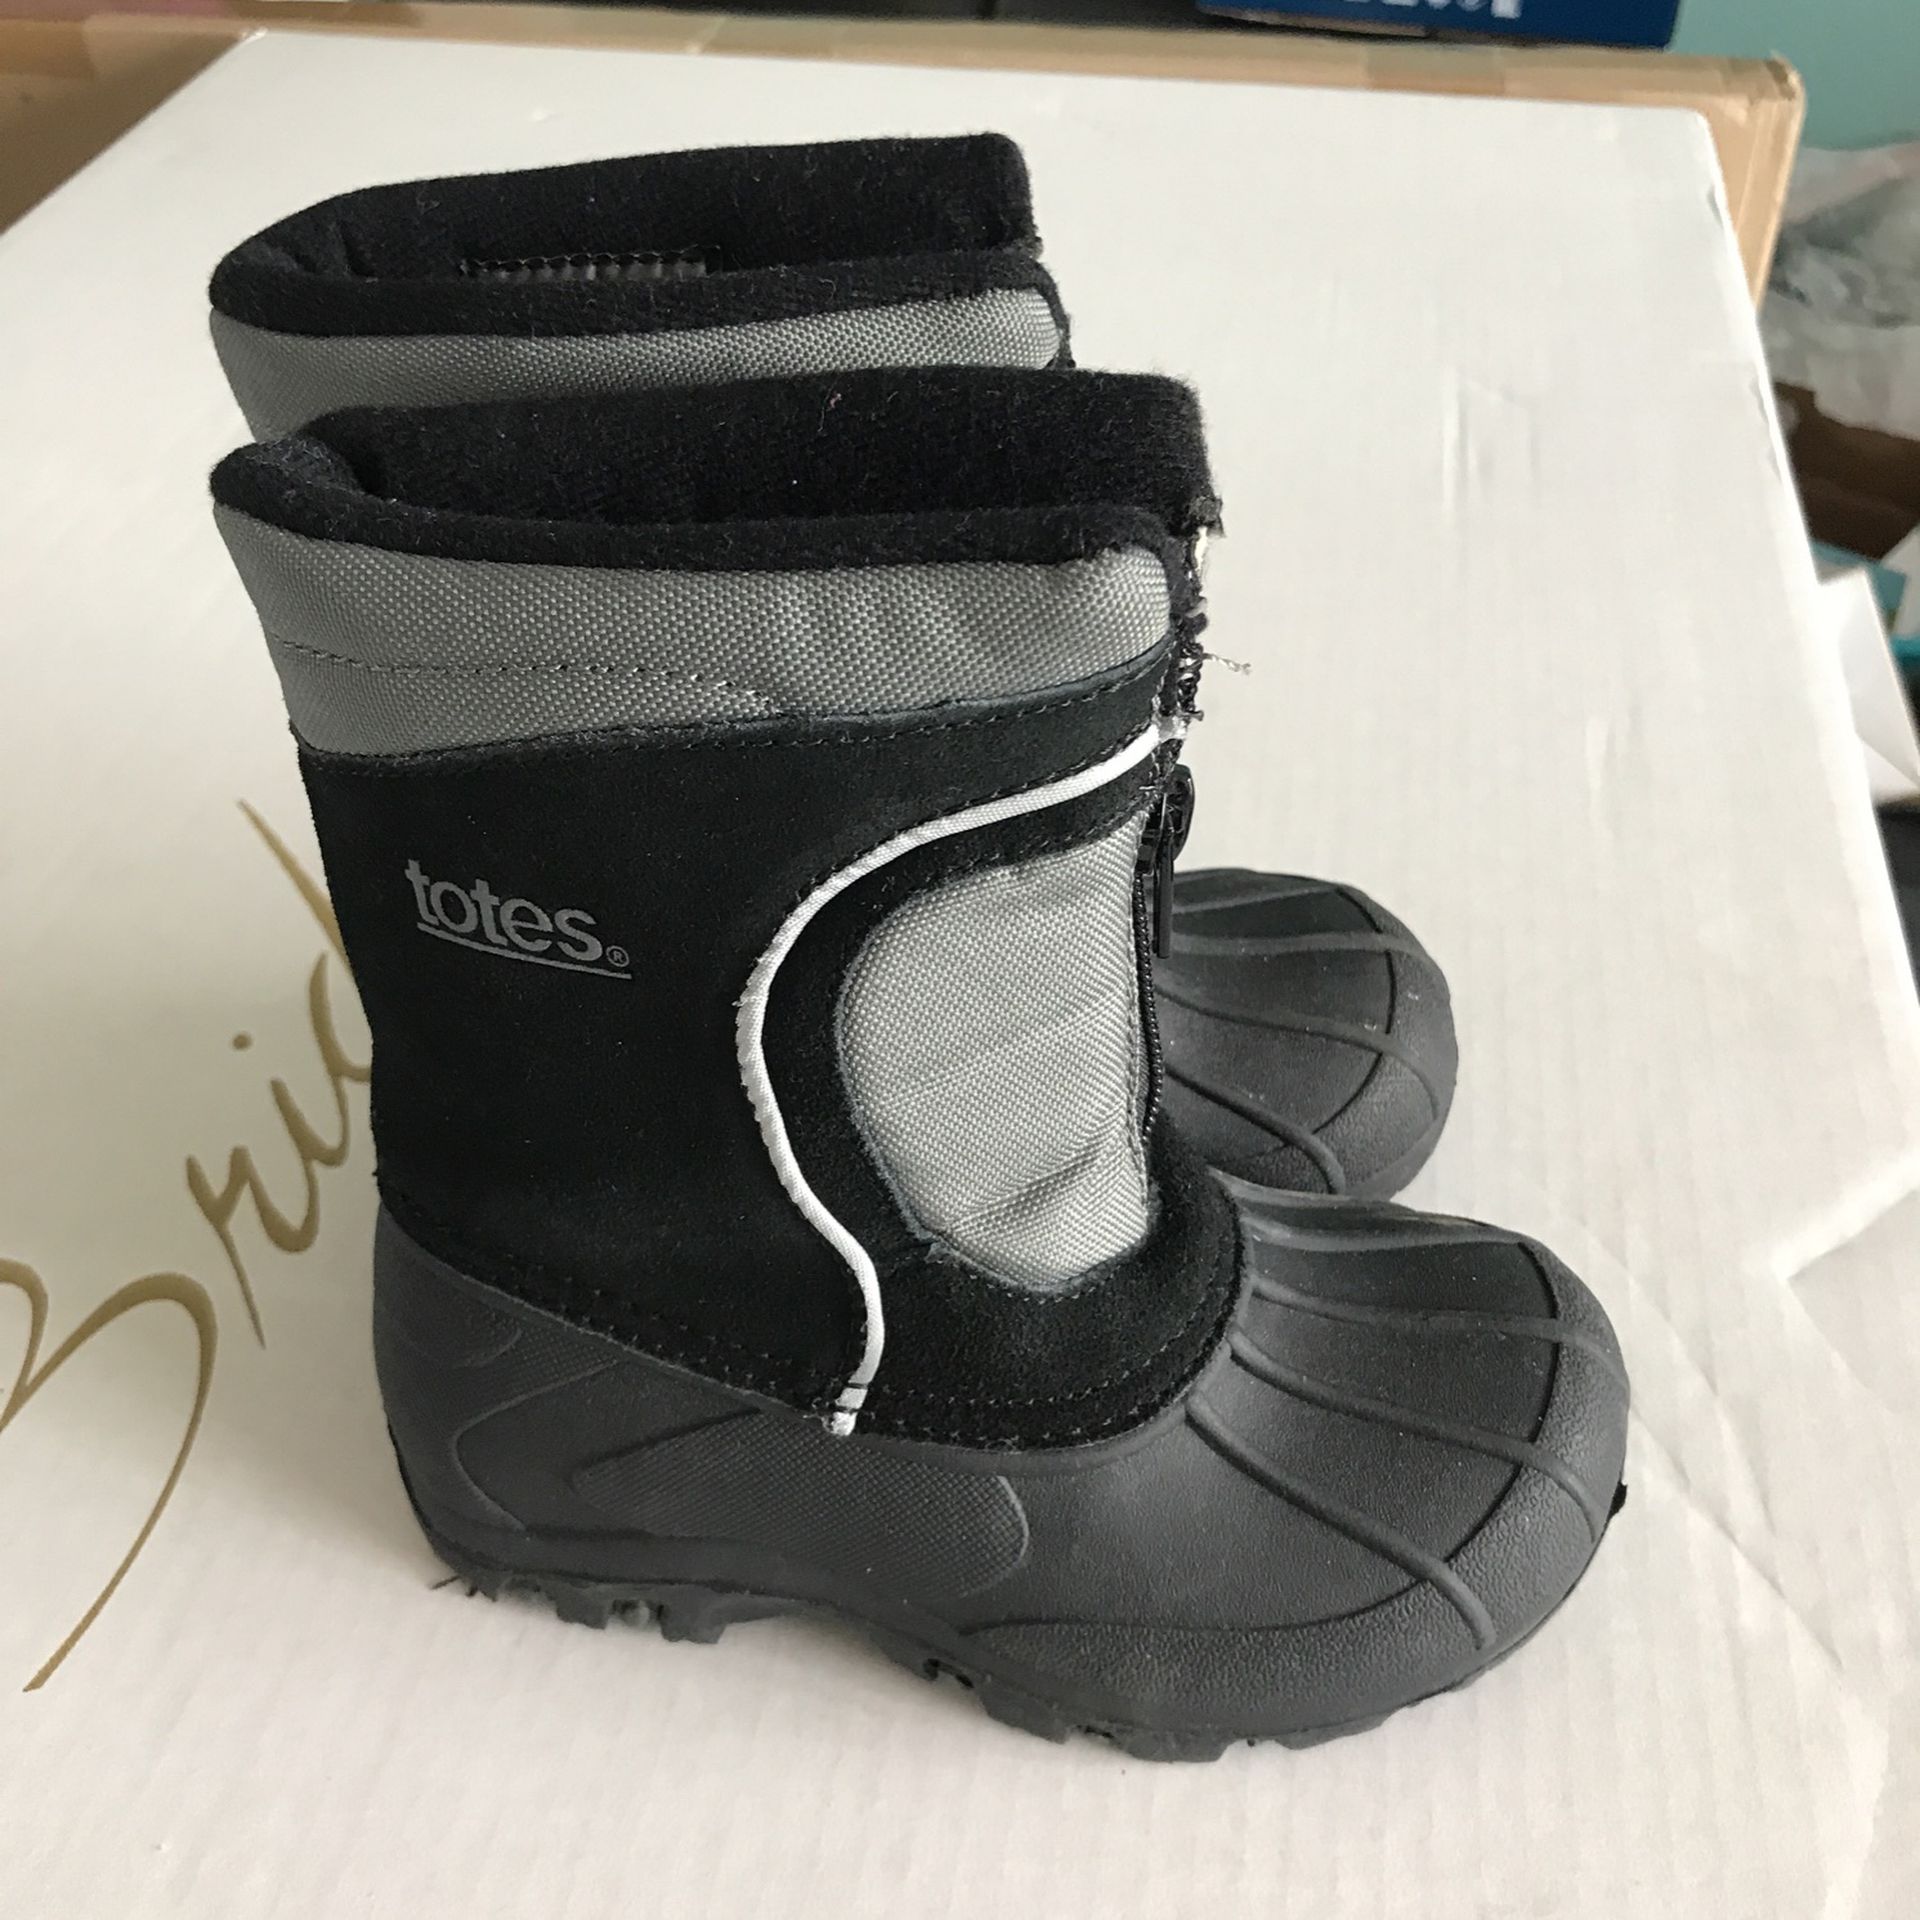 Snow Boots size 8 for toddlers